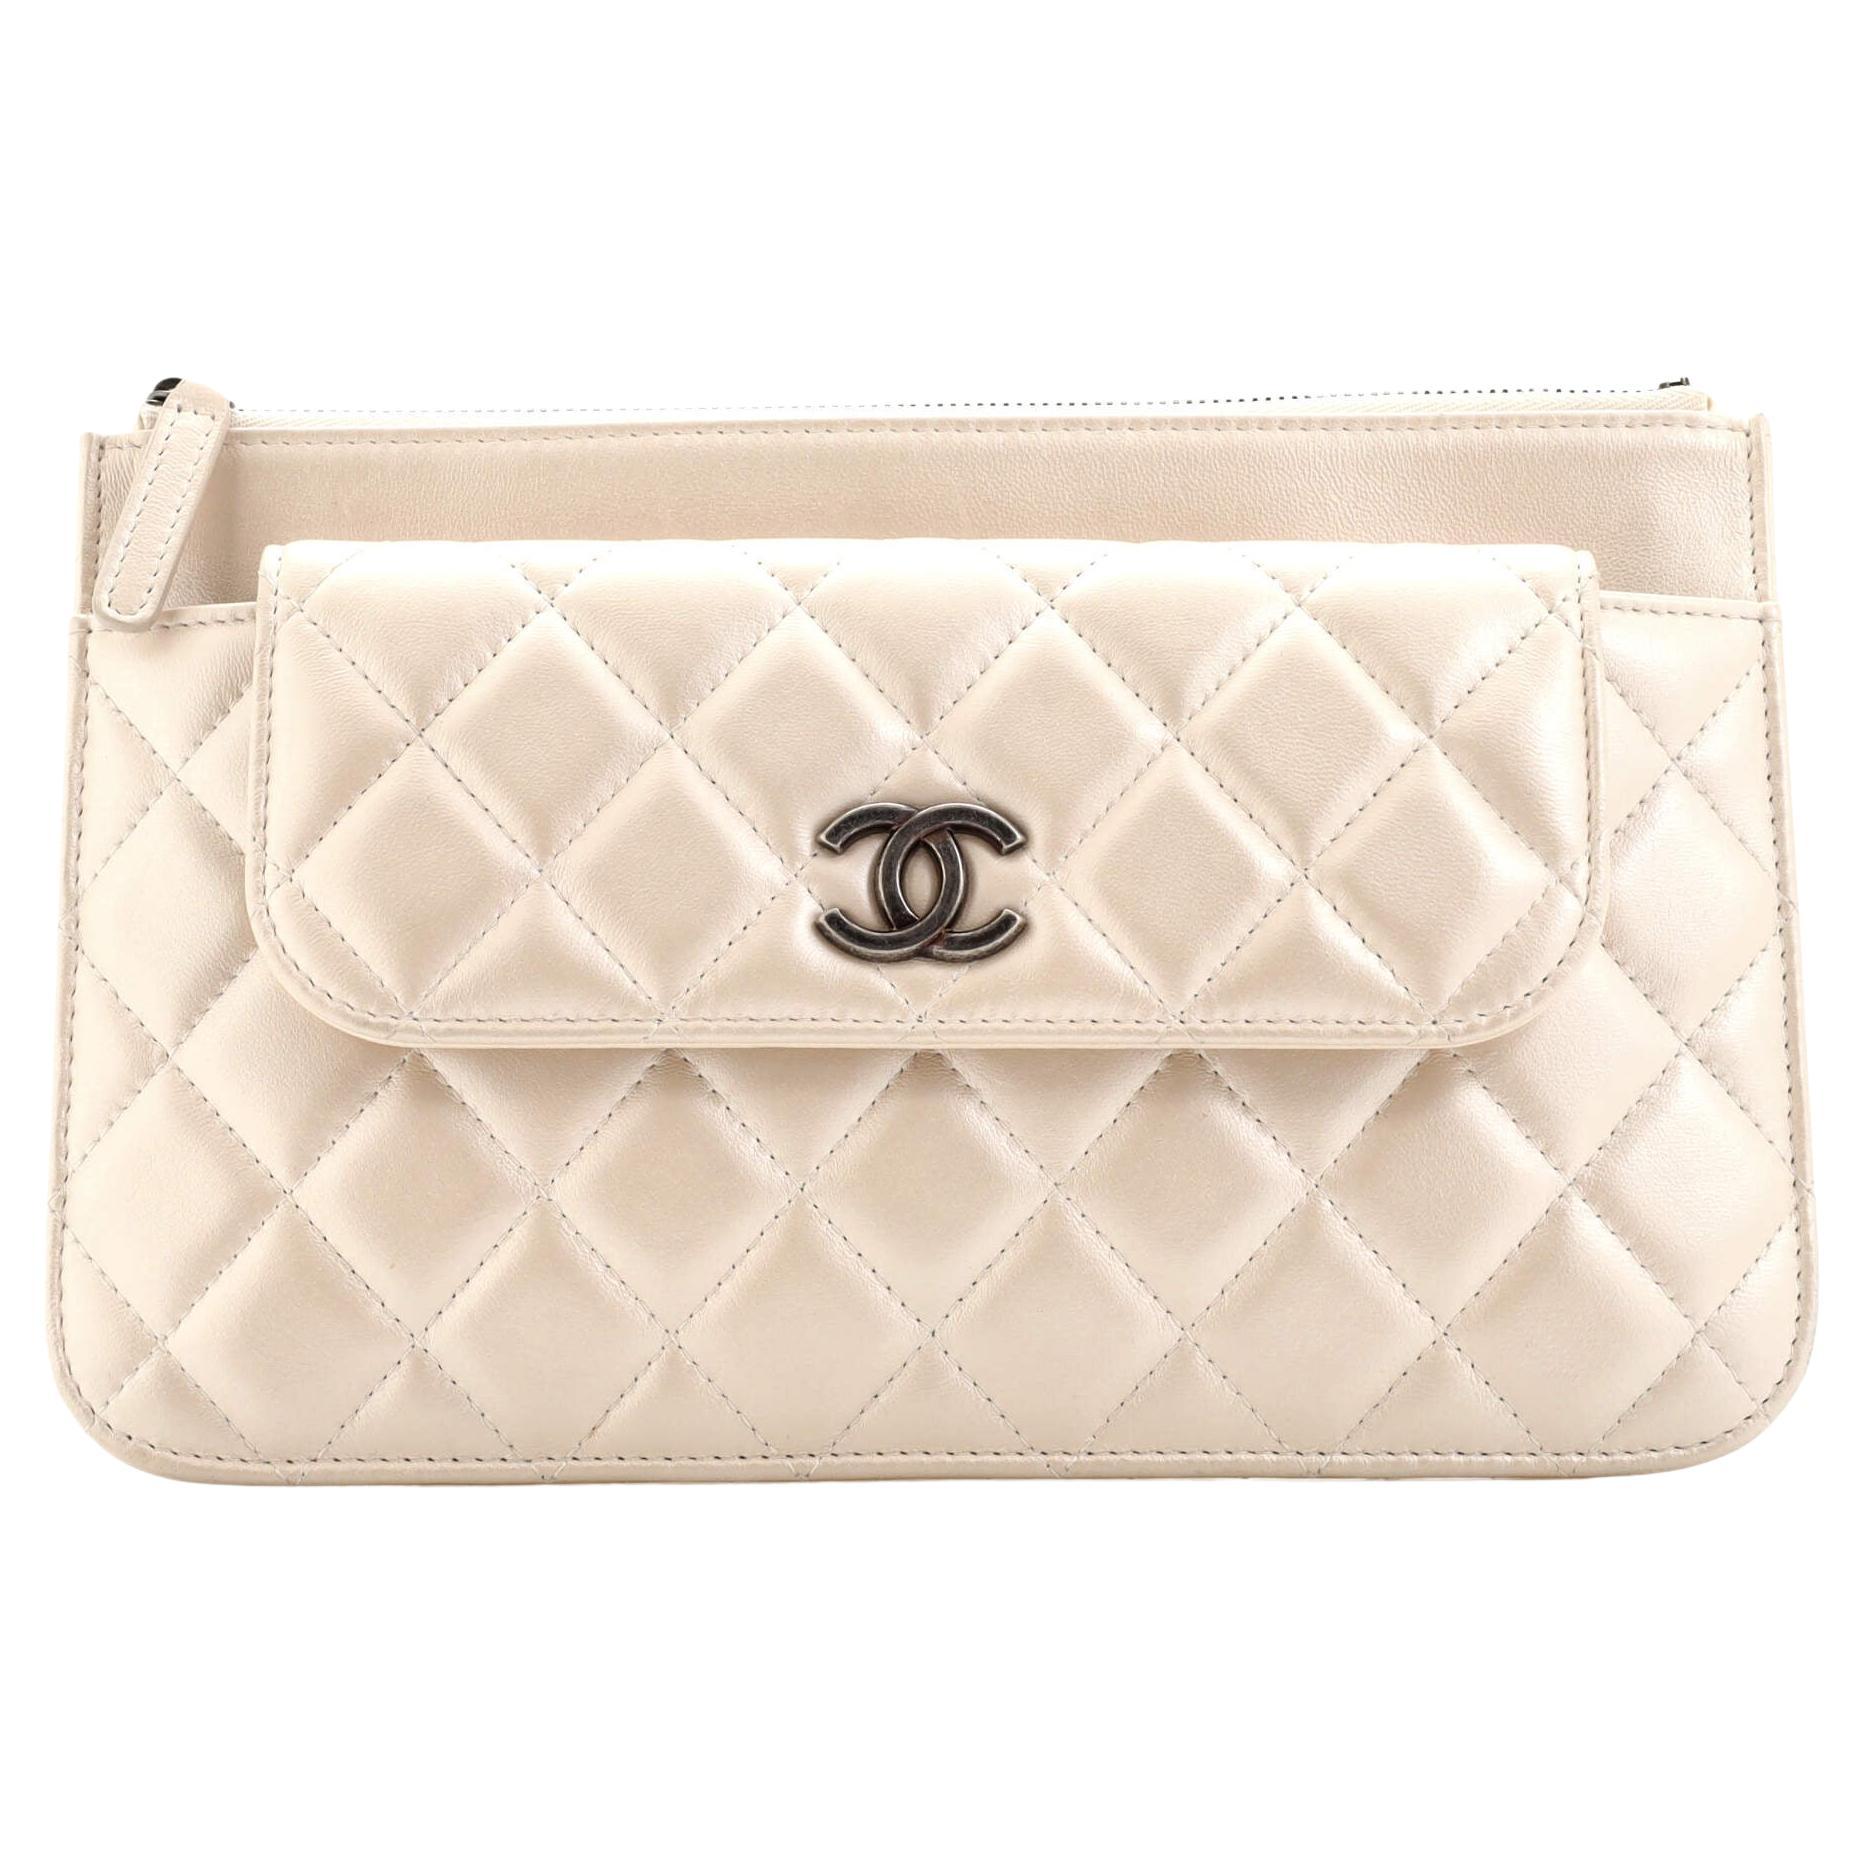 Chanel Metallic Bronze Caviar Leather Sevruga Wallet on Chain For